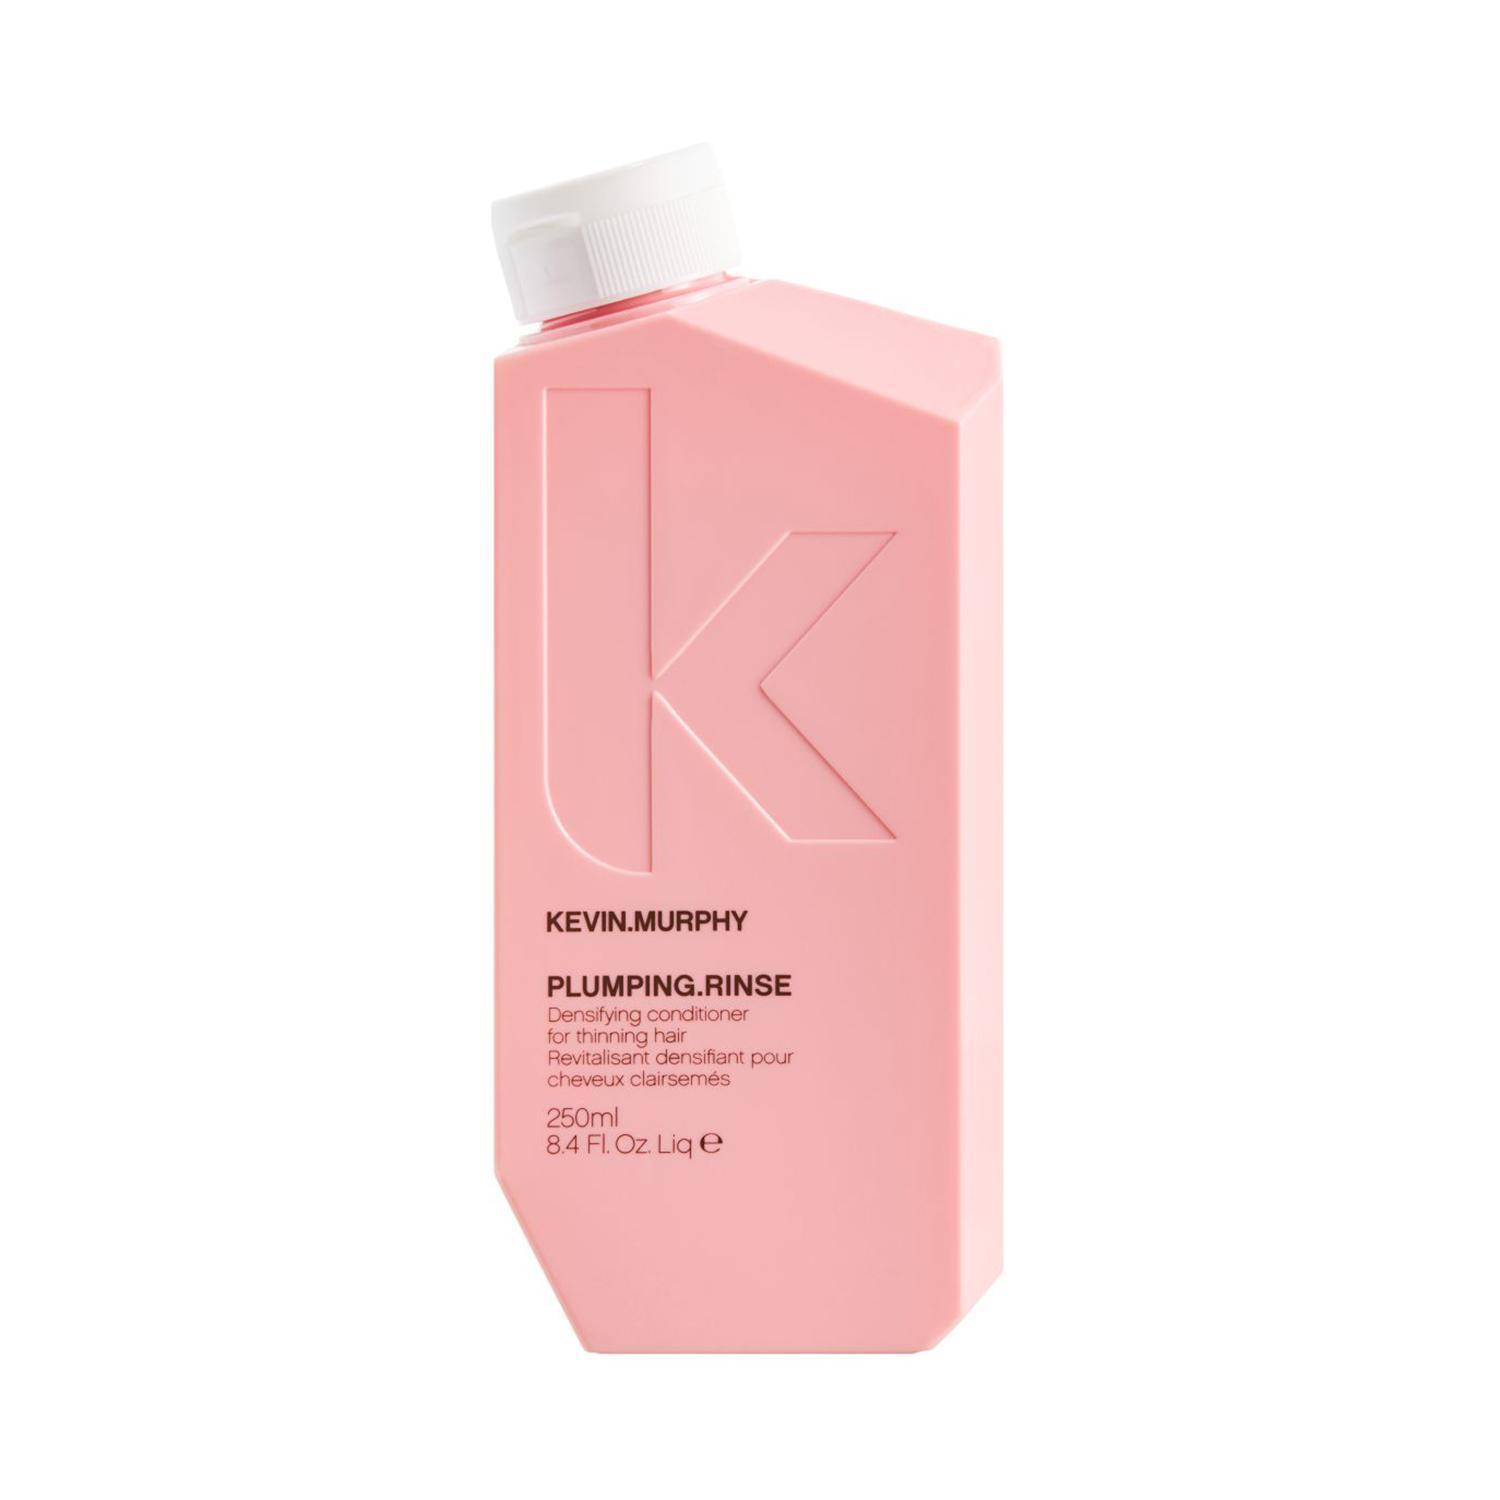 Kevin Murphy | Kevin Murphy Plumping Rinse Densifying Conditioner (250ml)